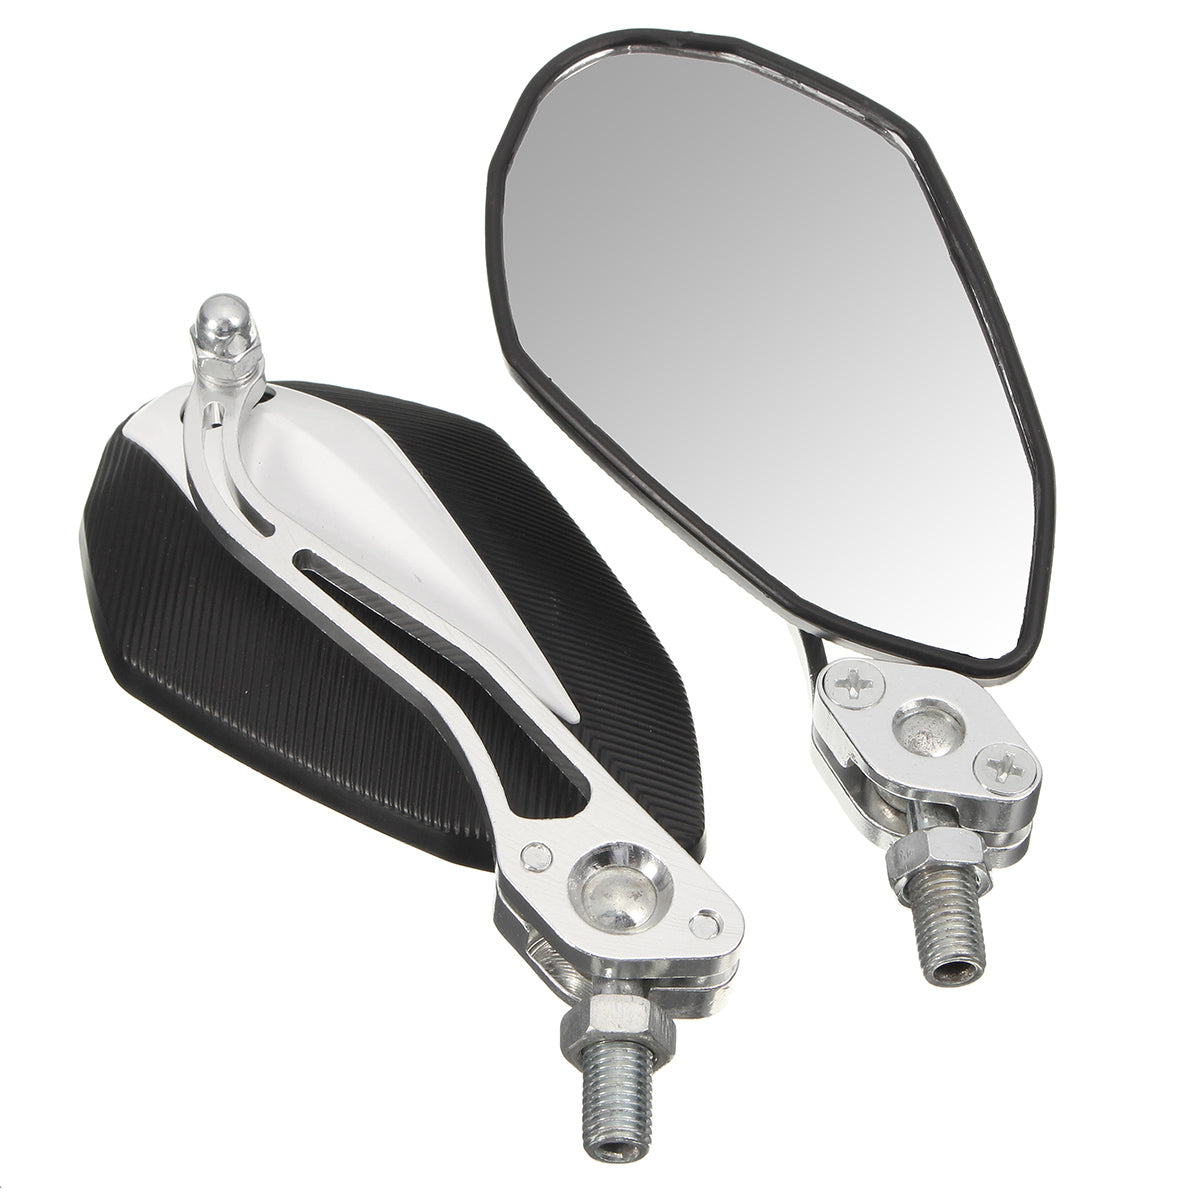 Motorcycle Rear View Side Mirrors Aluminum 10mm 8mm Screw Universal - Auto GoShop